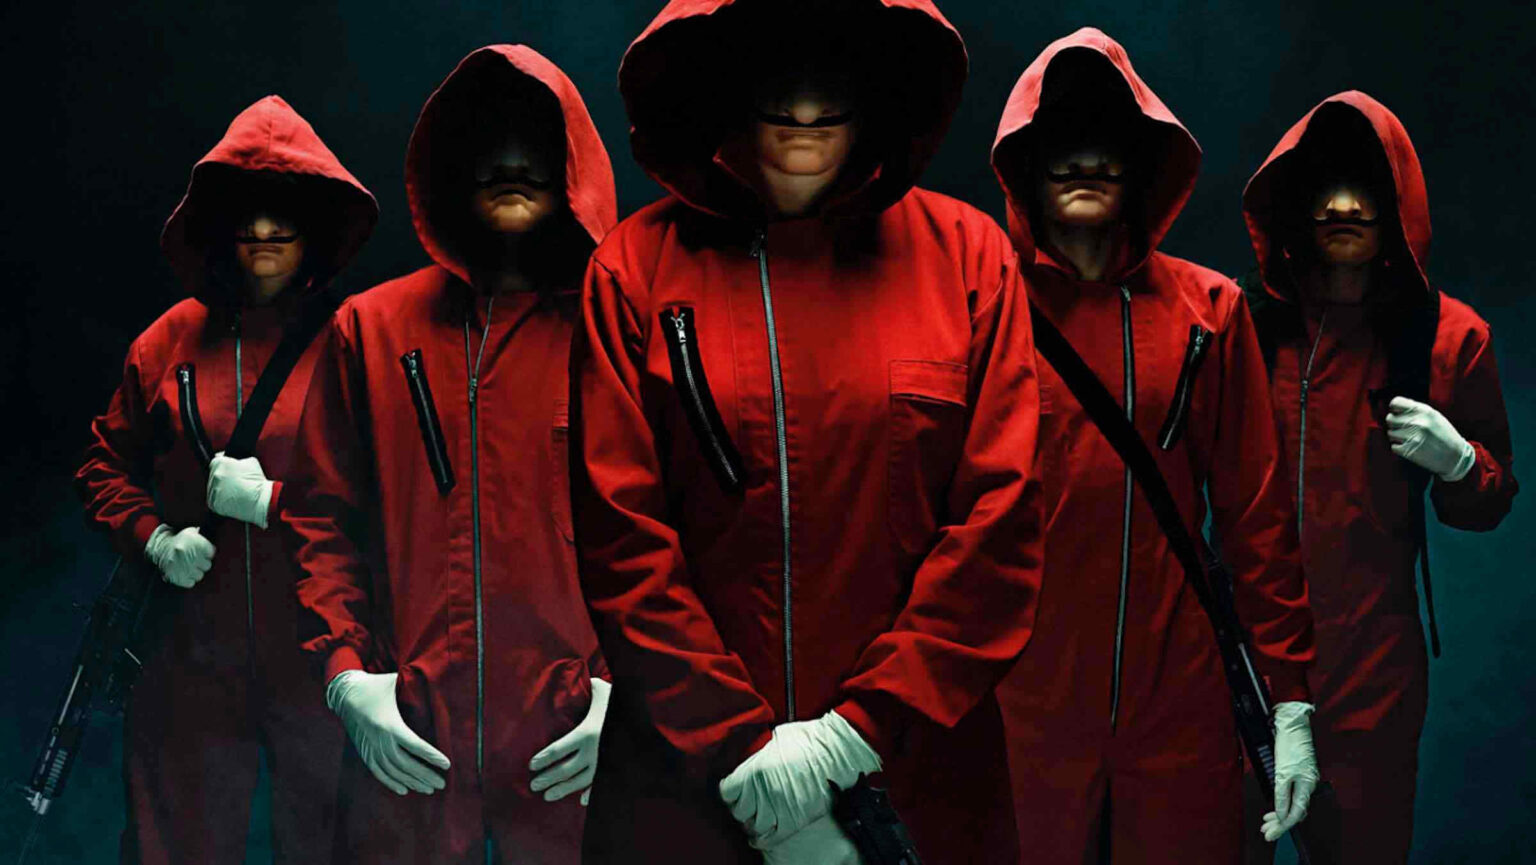 'Money Heist' season 5 spells the end for the series. Join us while we dissect a few theories about the fate of the intrepid heist team.